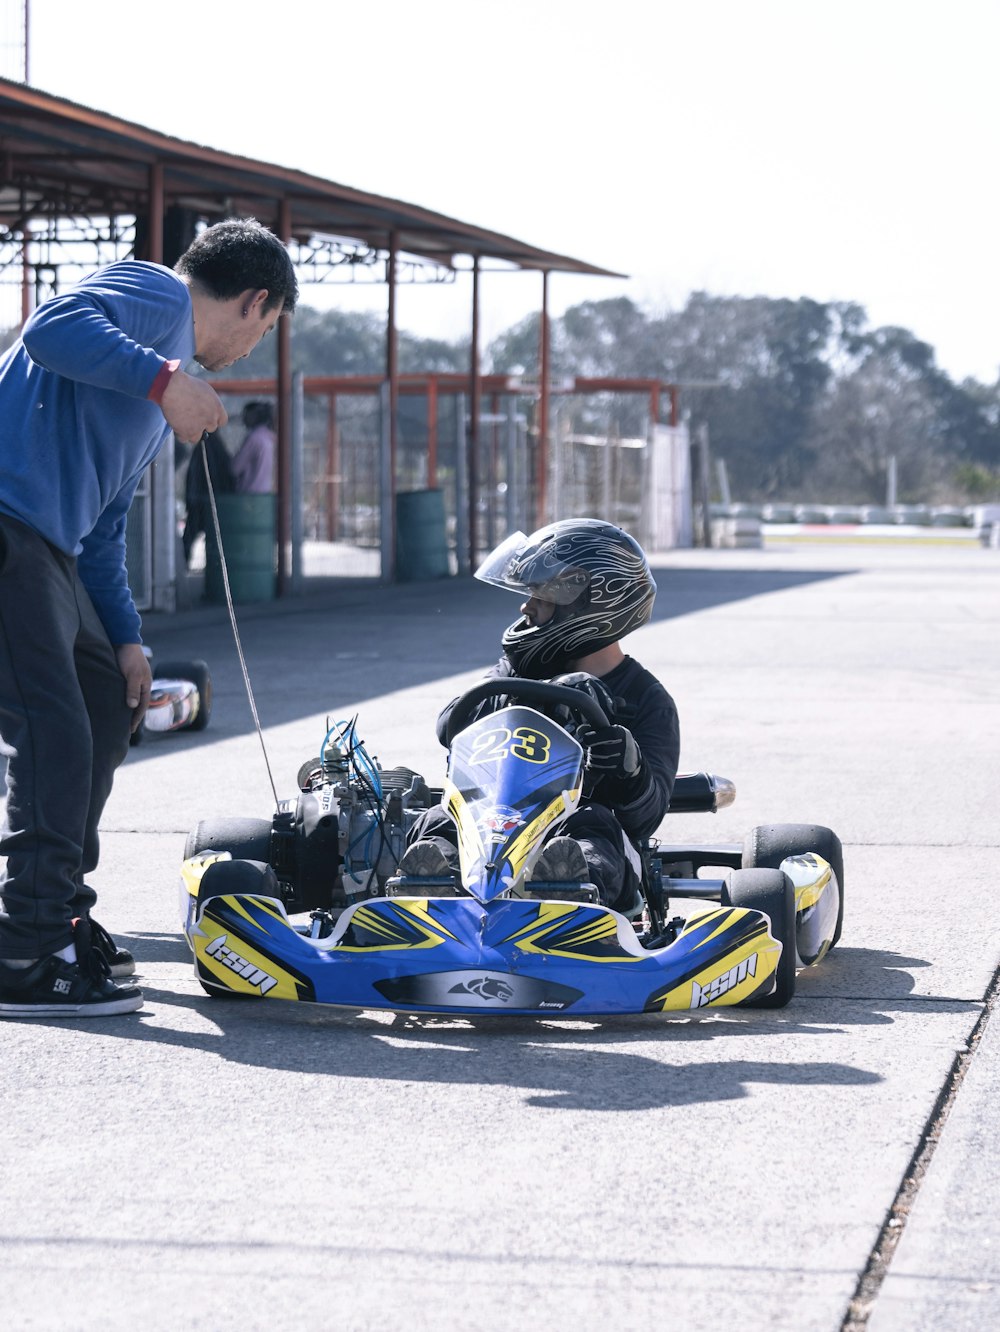 a man and a child on a go kart